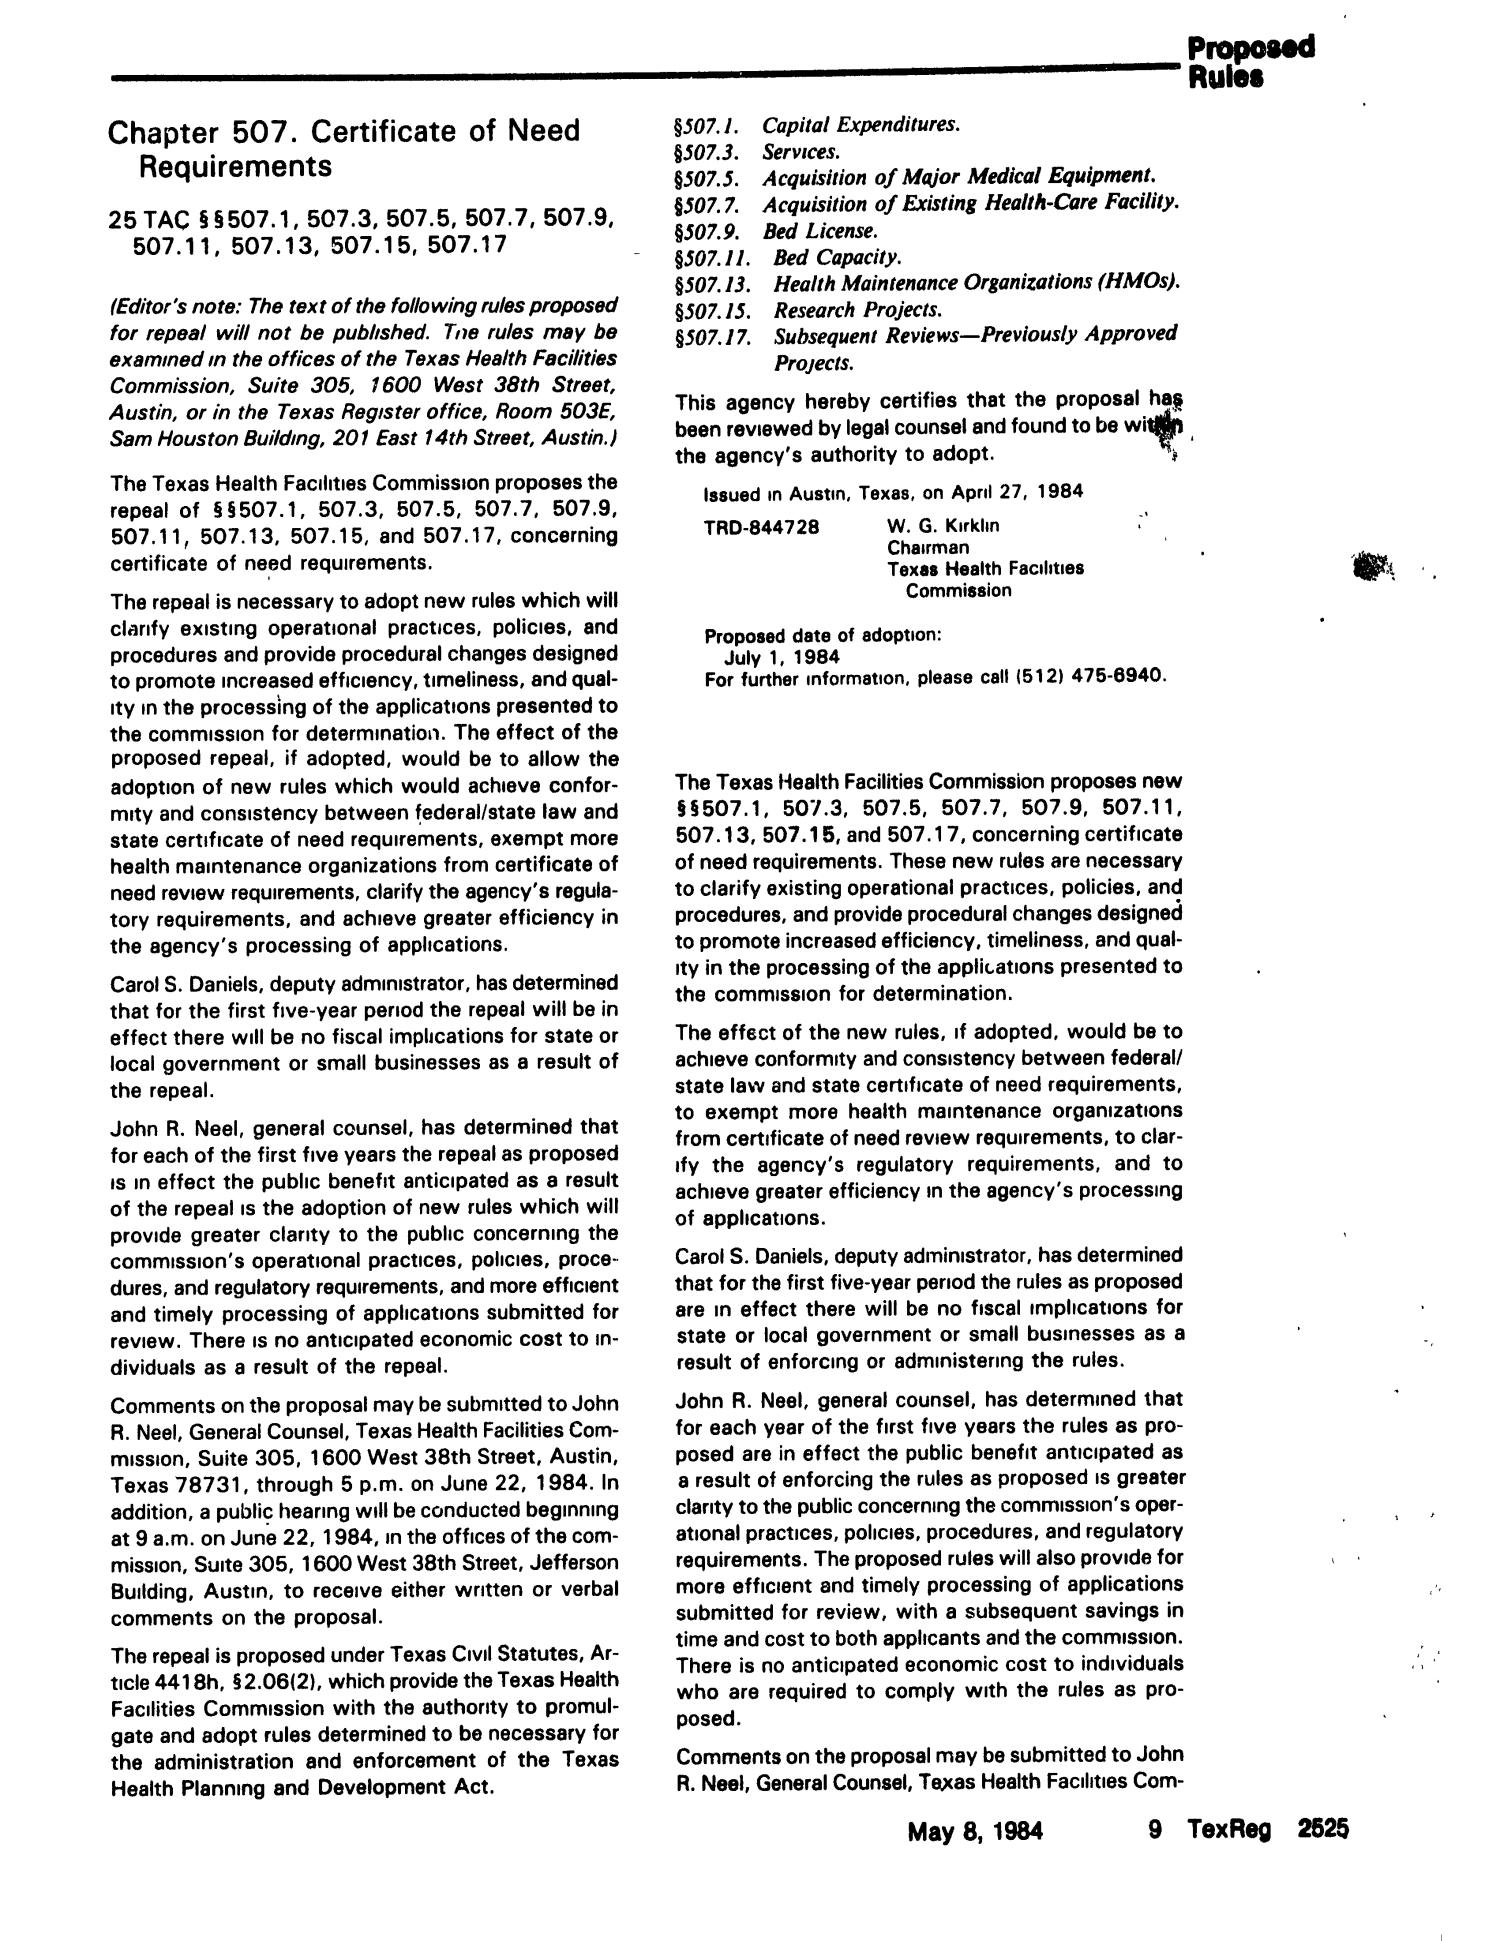 Texas Register, Volume 9, Number 34, Pages 2511-2580, May 8, 1984
                                                
                                                    2525
                                                